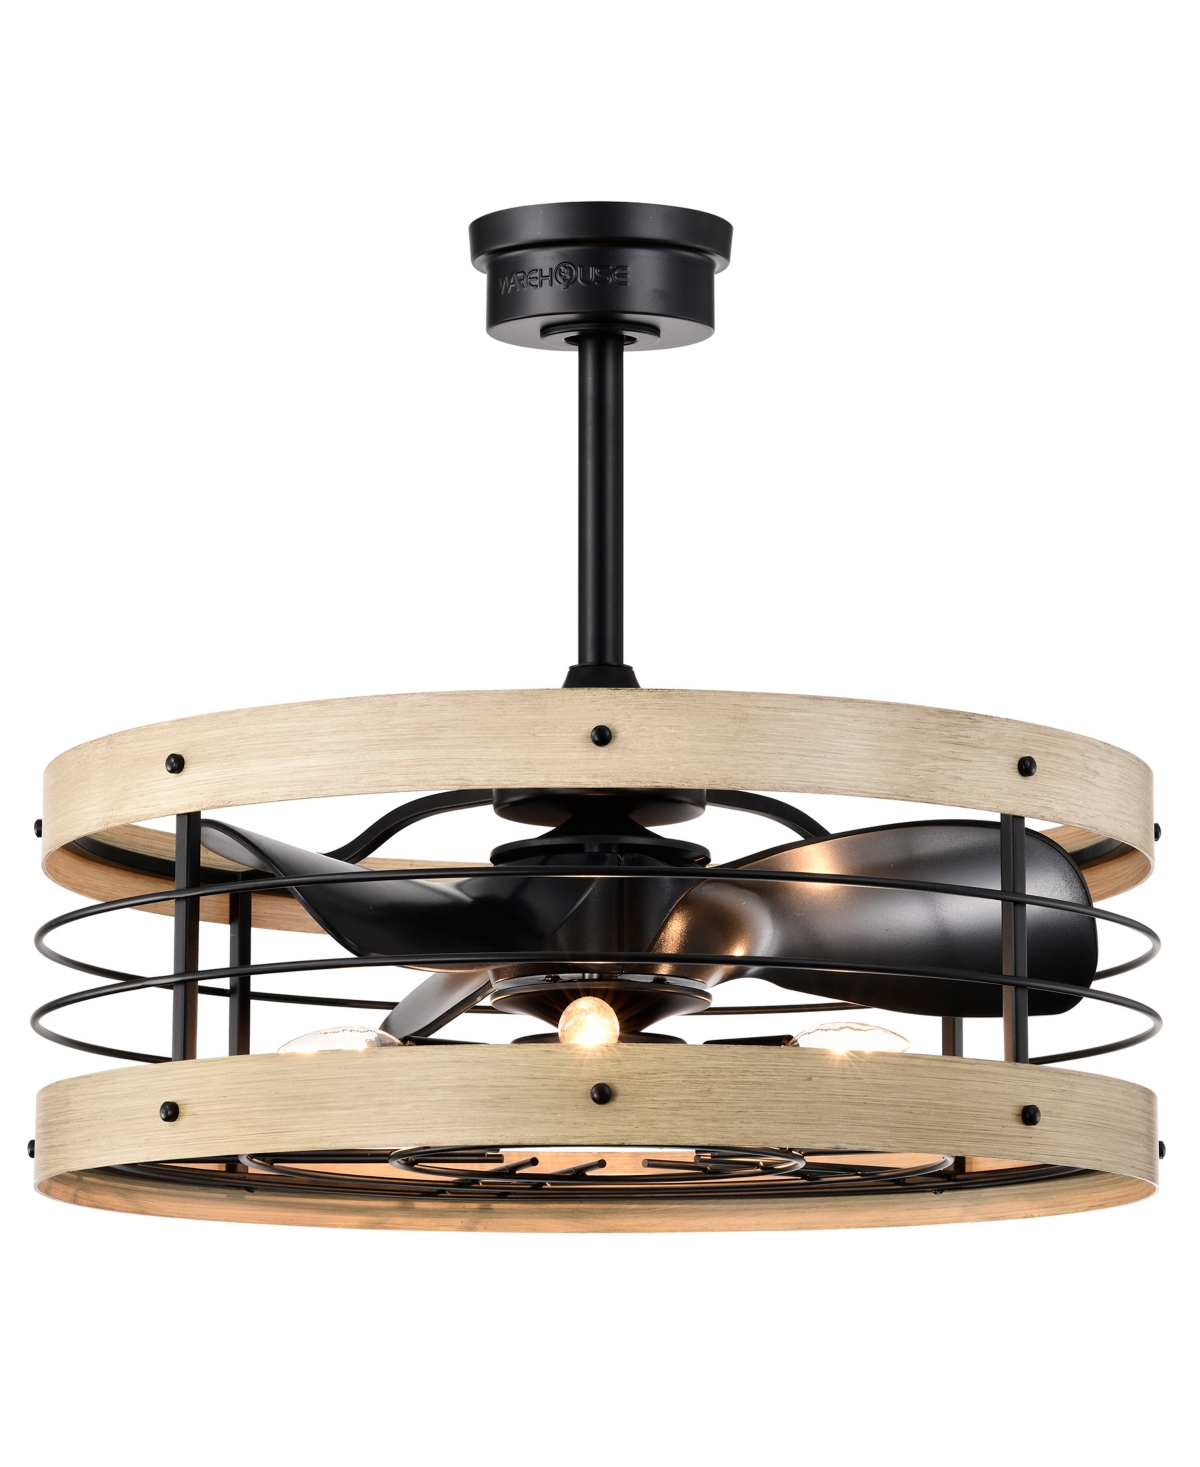 Home Accessories Zulu 25" 5-light Indoor Finish Ceiling Fan With Light Kit In Matte Black And Faux Wood Grain